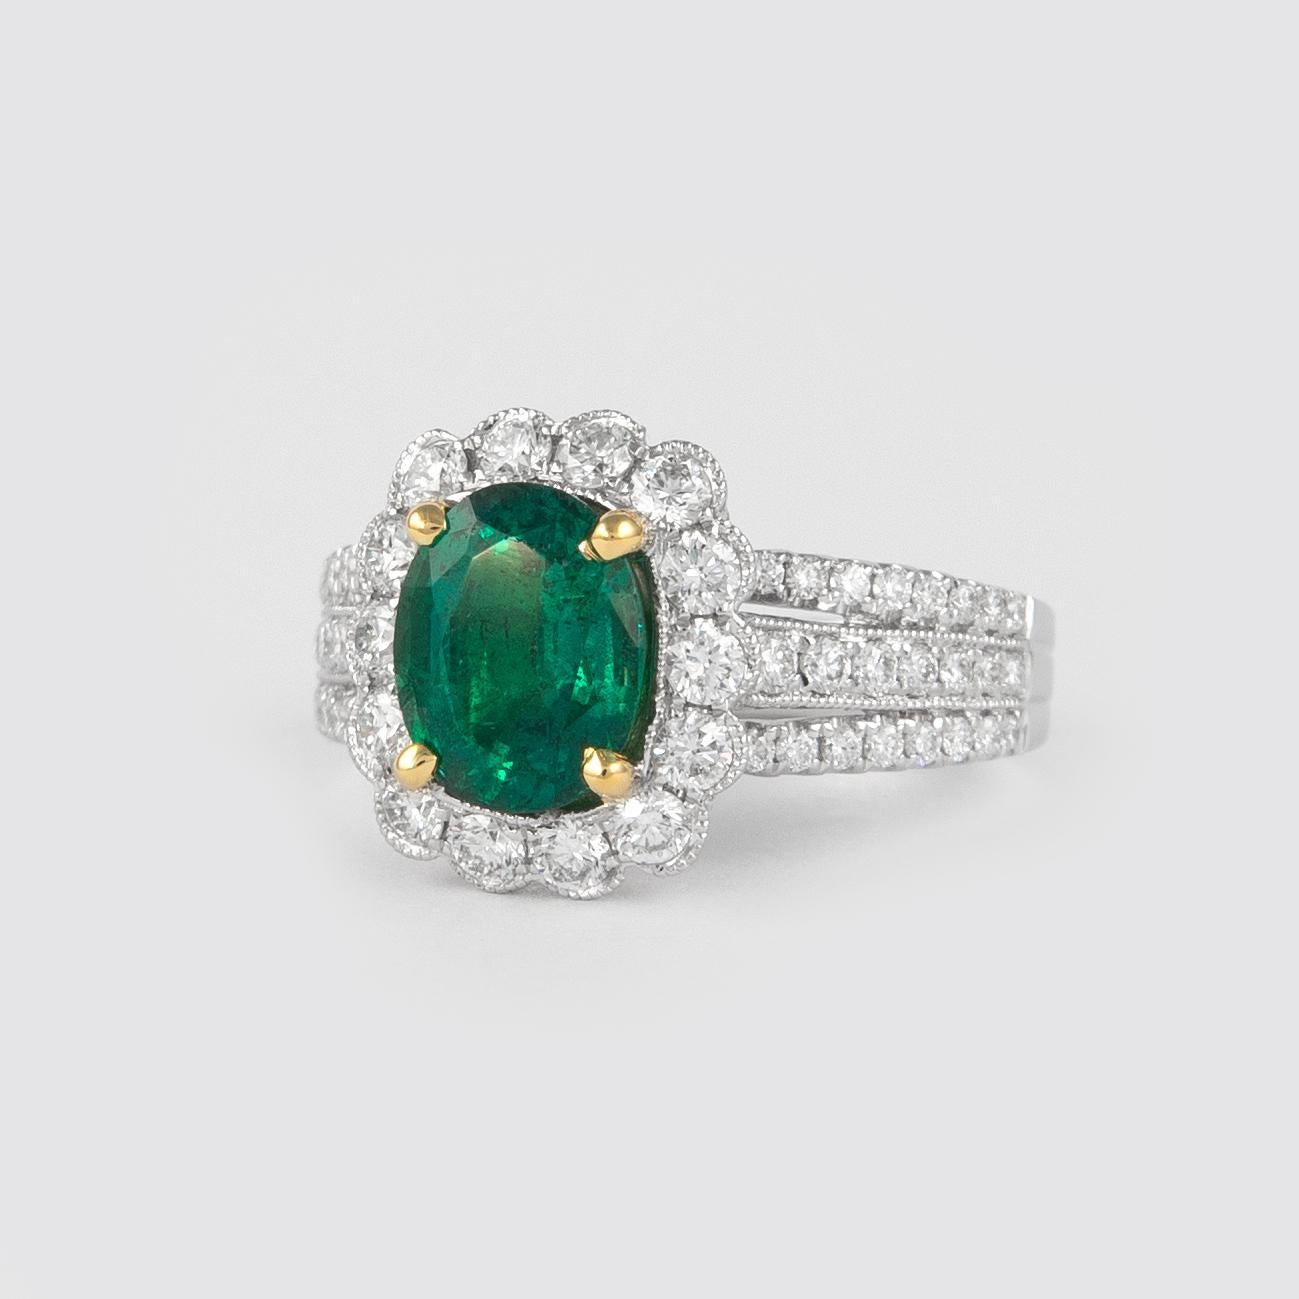 Lovely emerald with diamond halo ring. By Alexander of Beverly Hills.
1.72 carat oval emerald complimented with 60 round brilliant diamonds, 1.72ct. Approximately G/H color and SI clarity. 2.67ct total gemstone weight, in 18k white gold and yellow